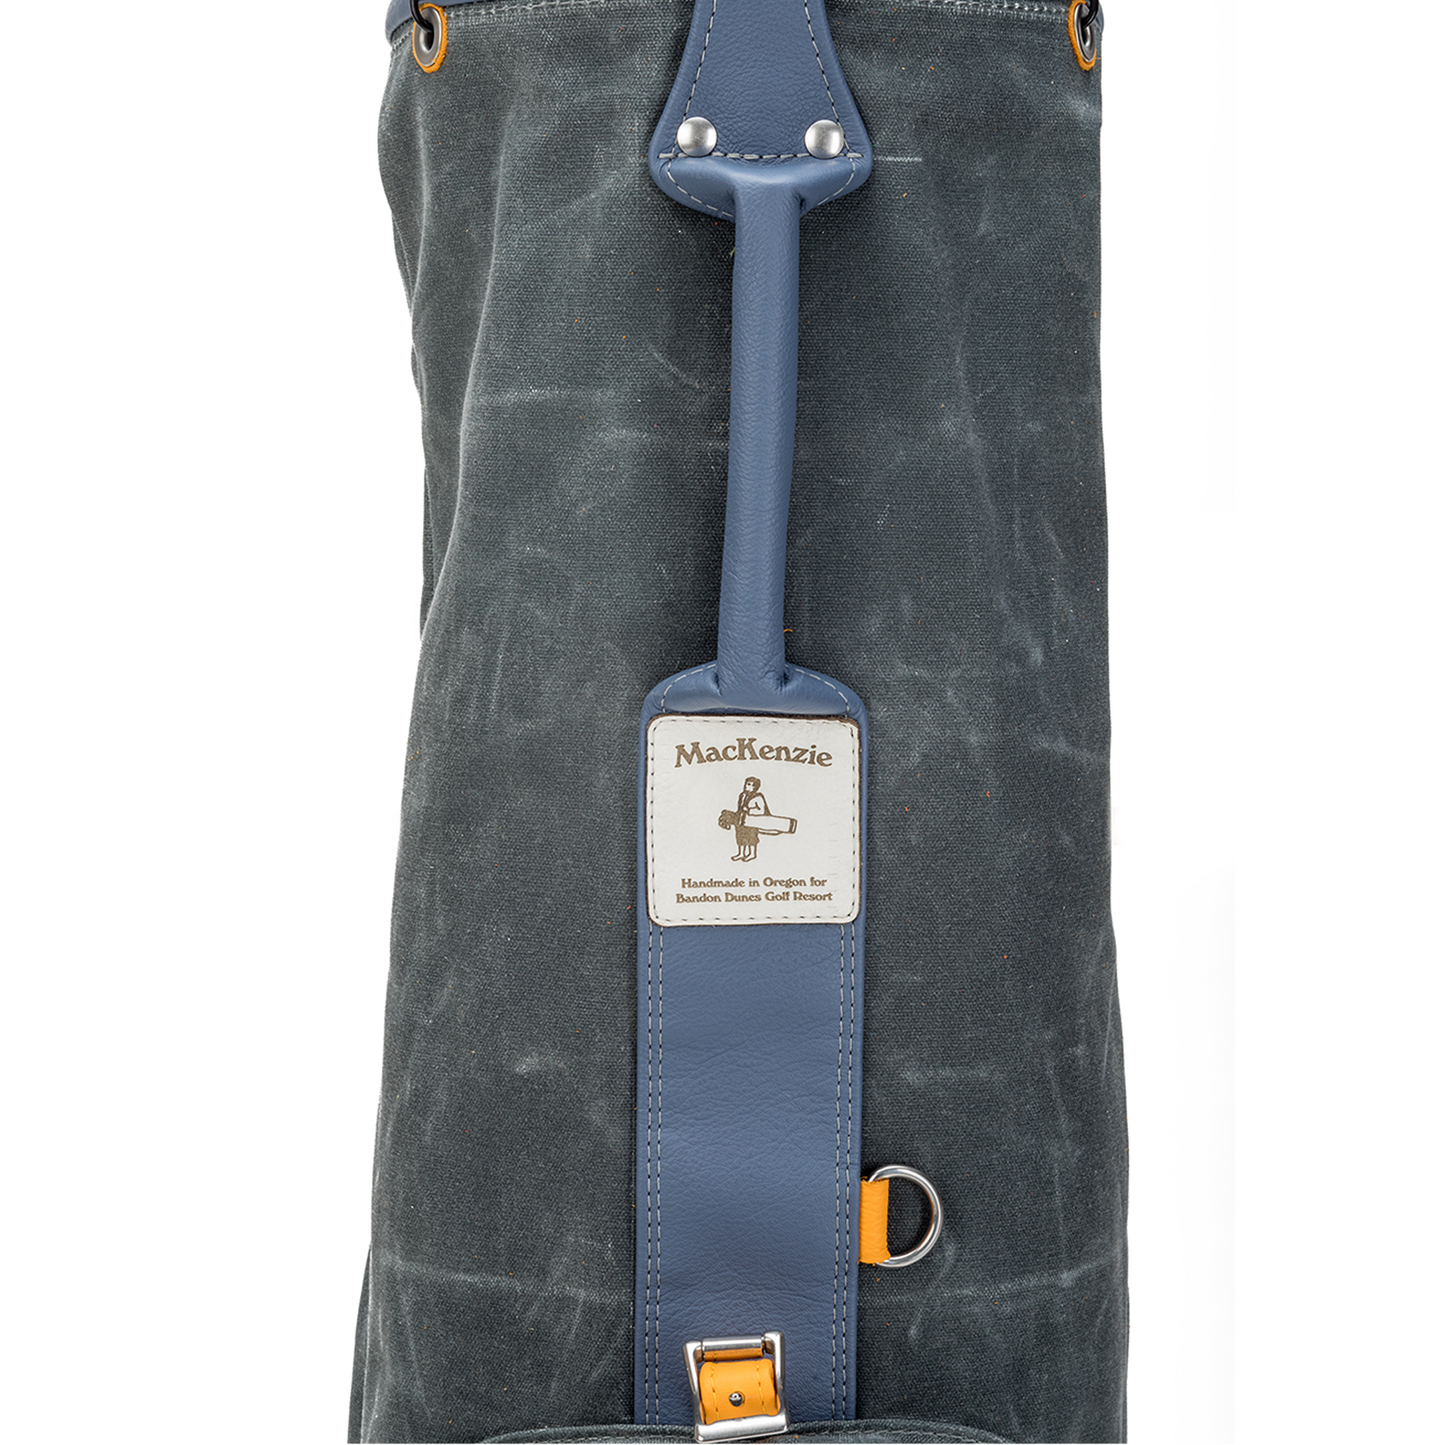 New Waxed Canvas Golf Bag- Pacific Dunes